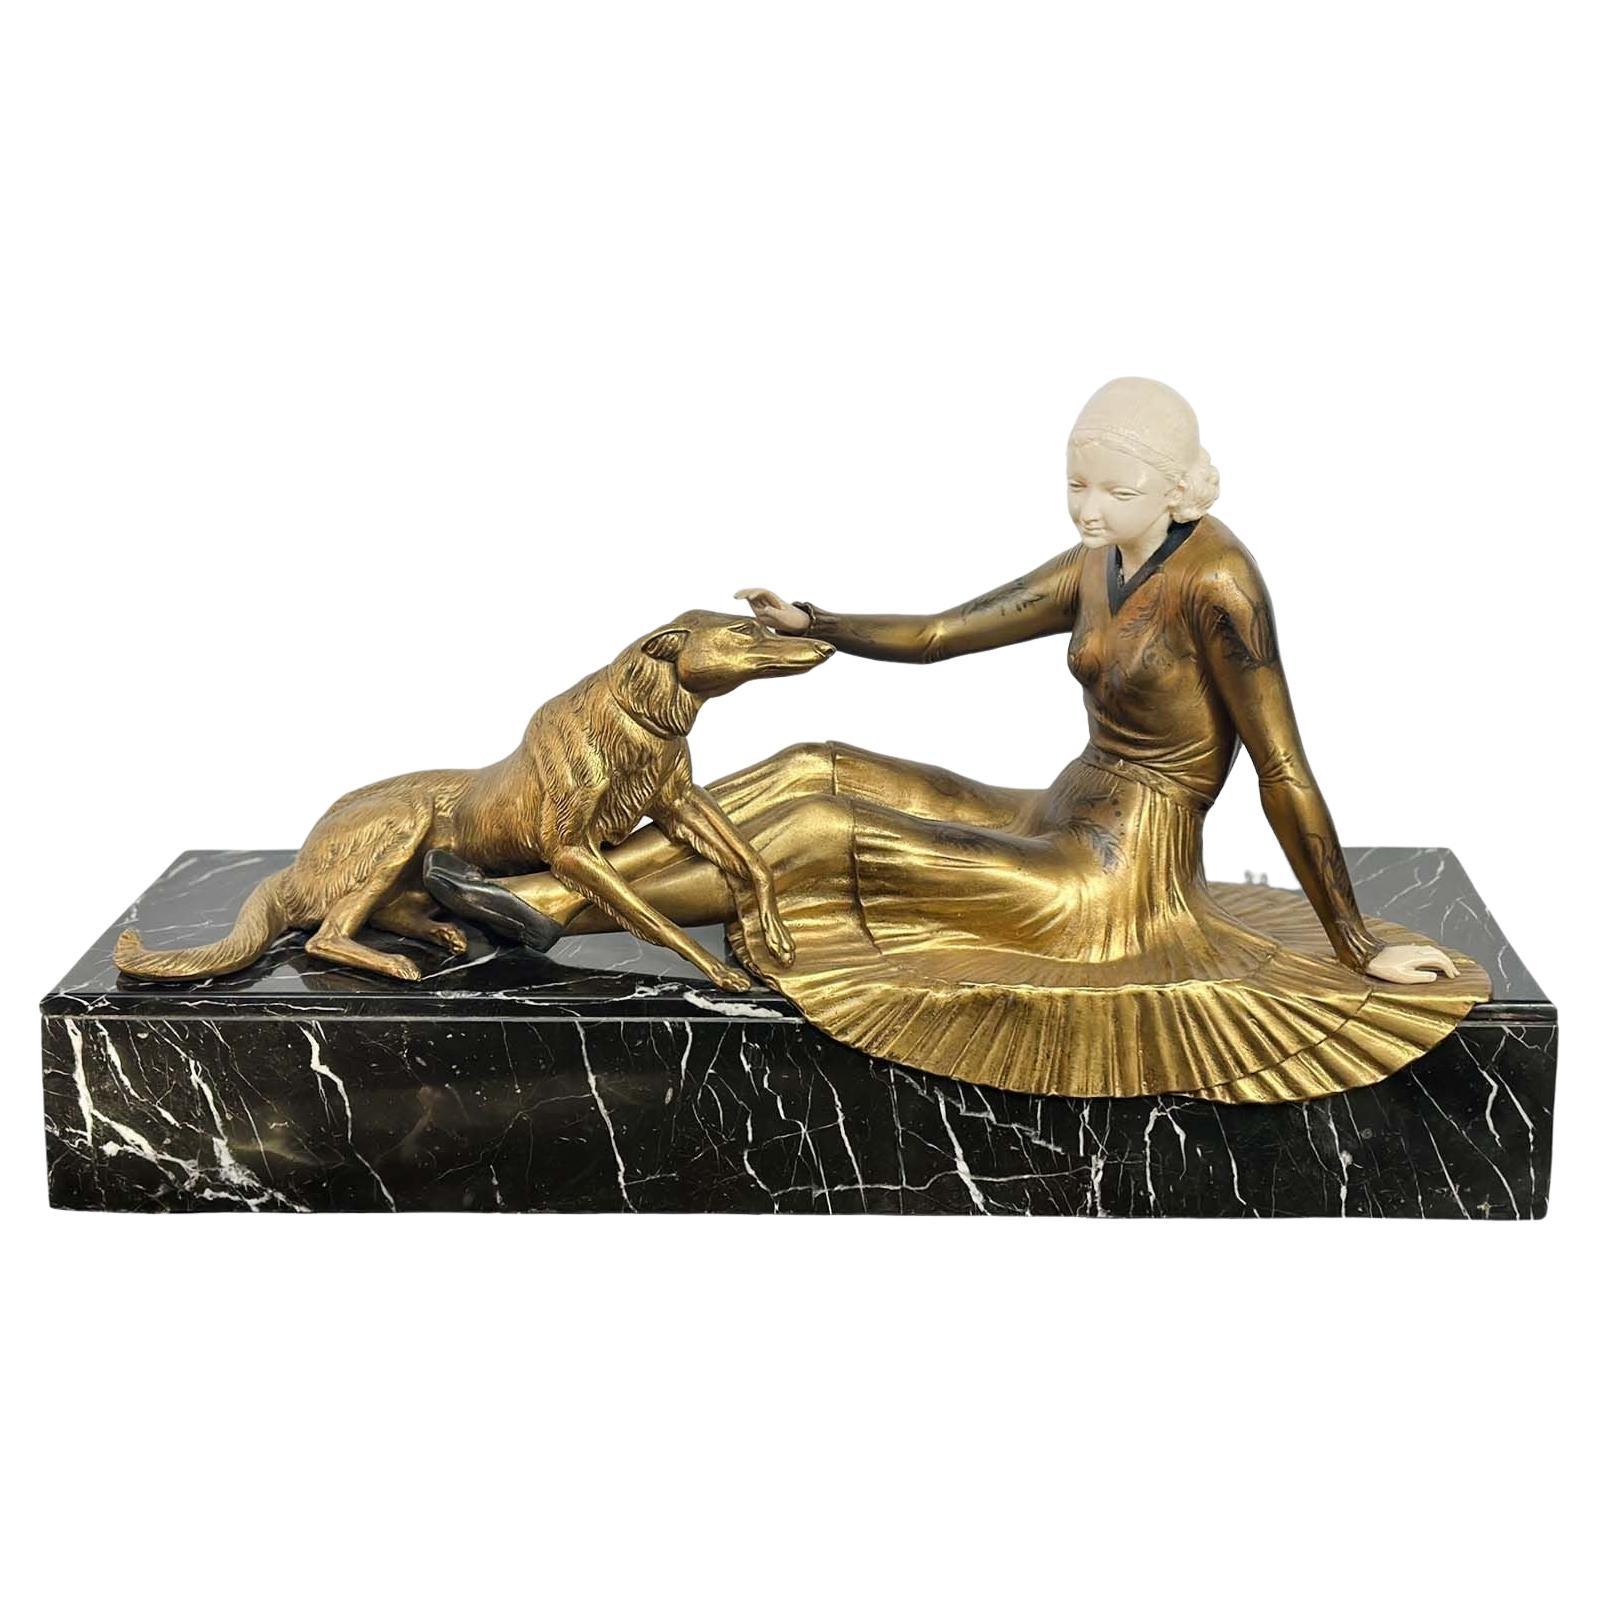 Art Deco Bronze Patina & Marble Sculpture of Women & Dog by Cham, c. 1920's For Sale